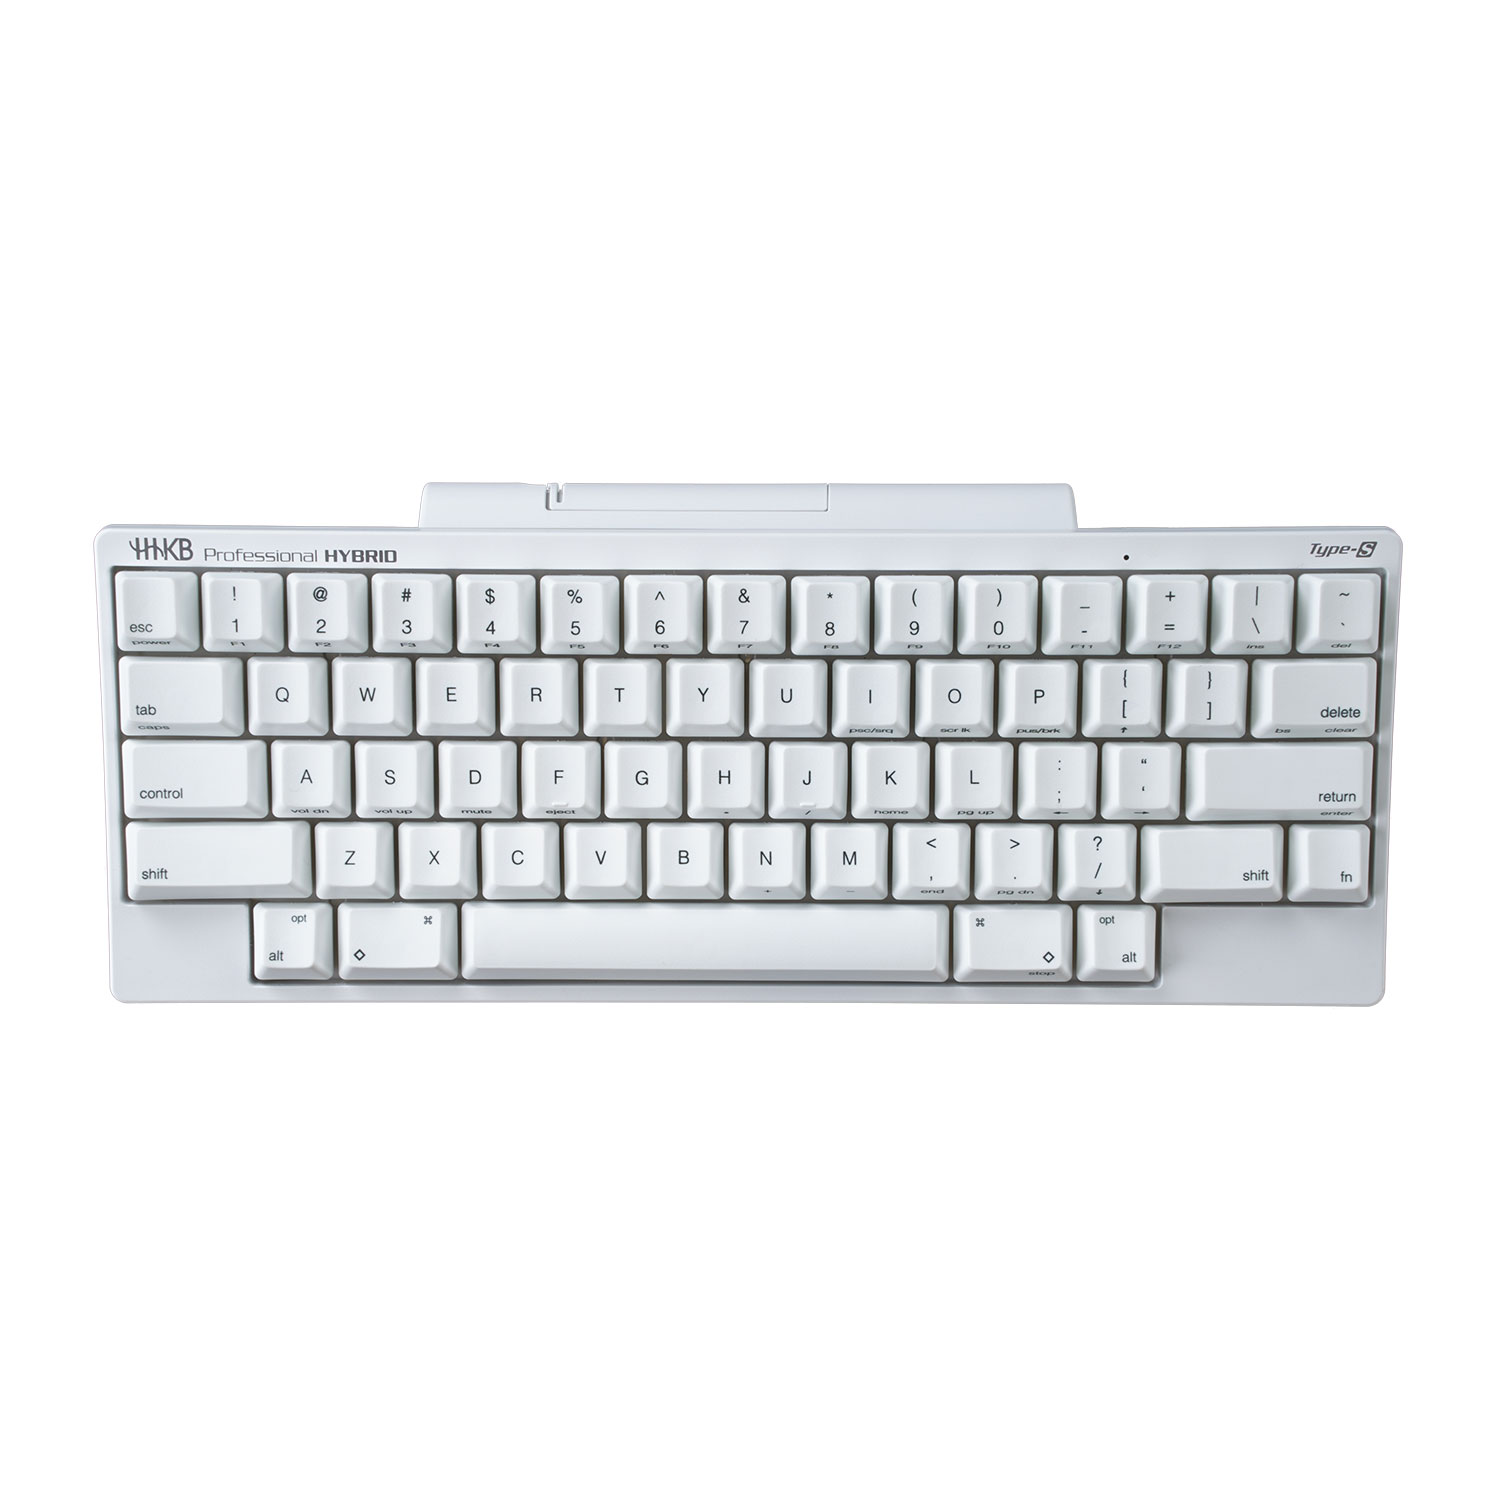 HHKB HYBRID Type-S Snow Tastatur in pure white with printed keycaps